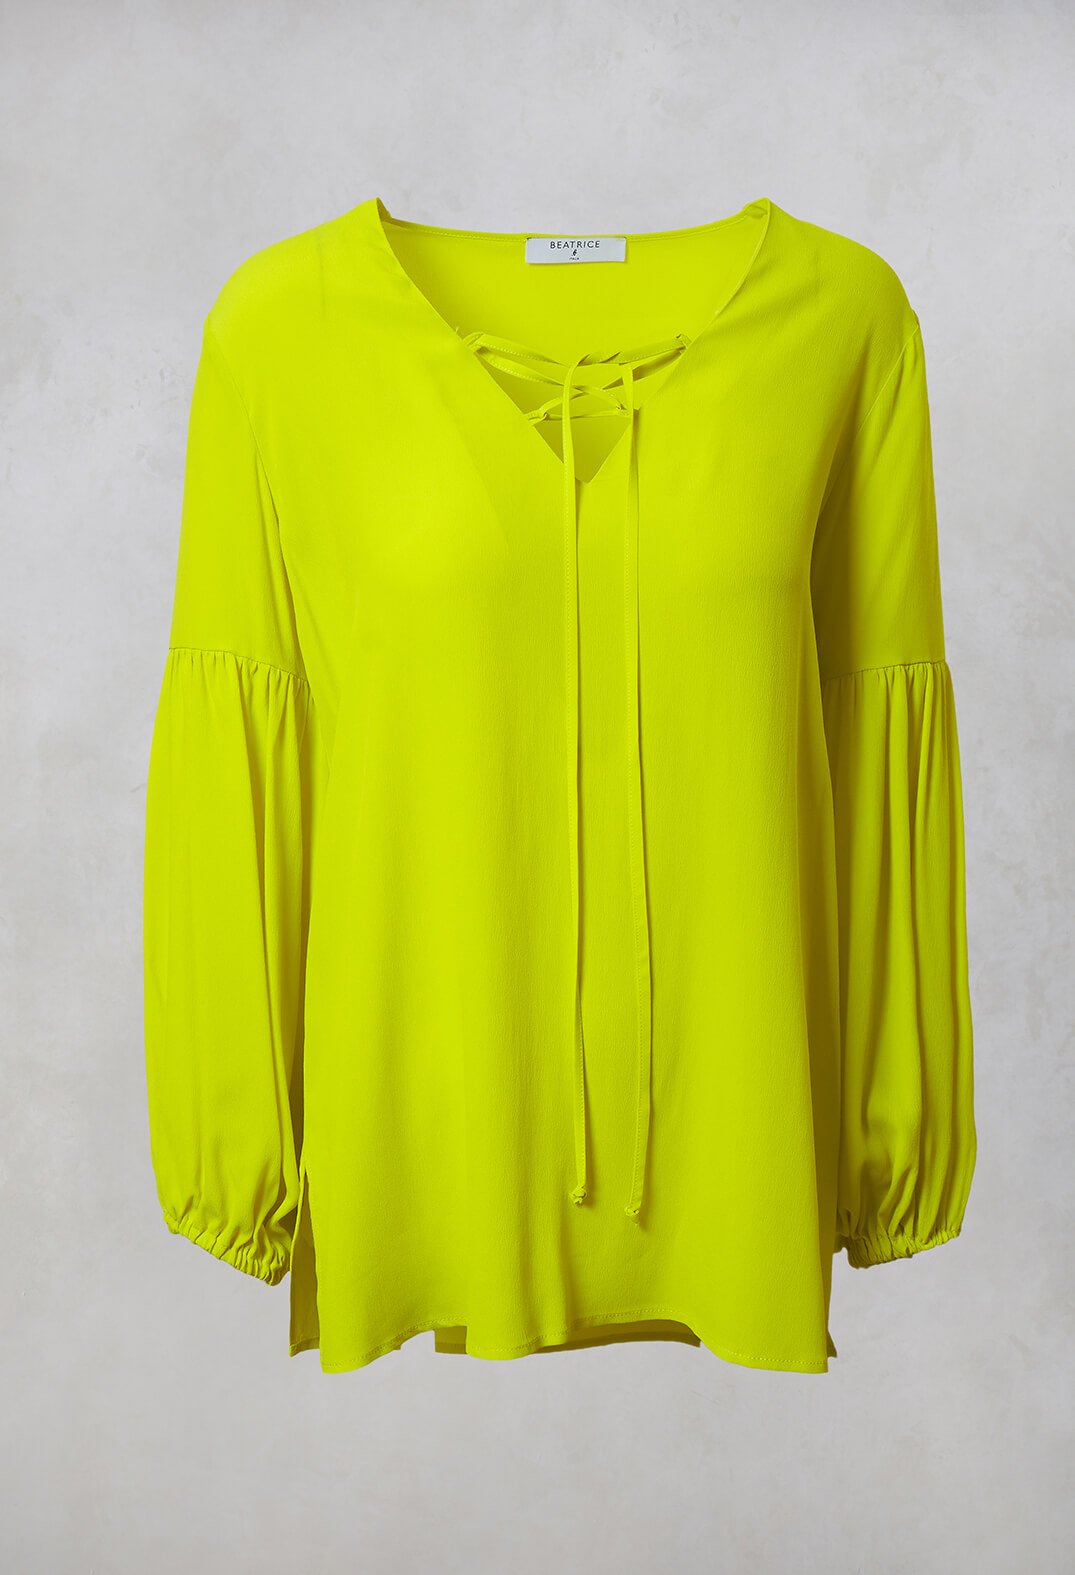 Beatrice B blouse in fluorescent yellow